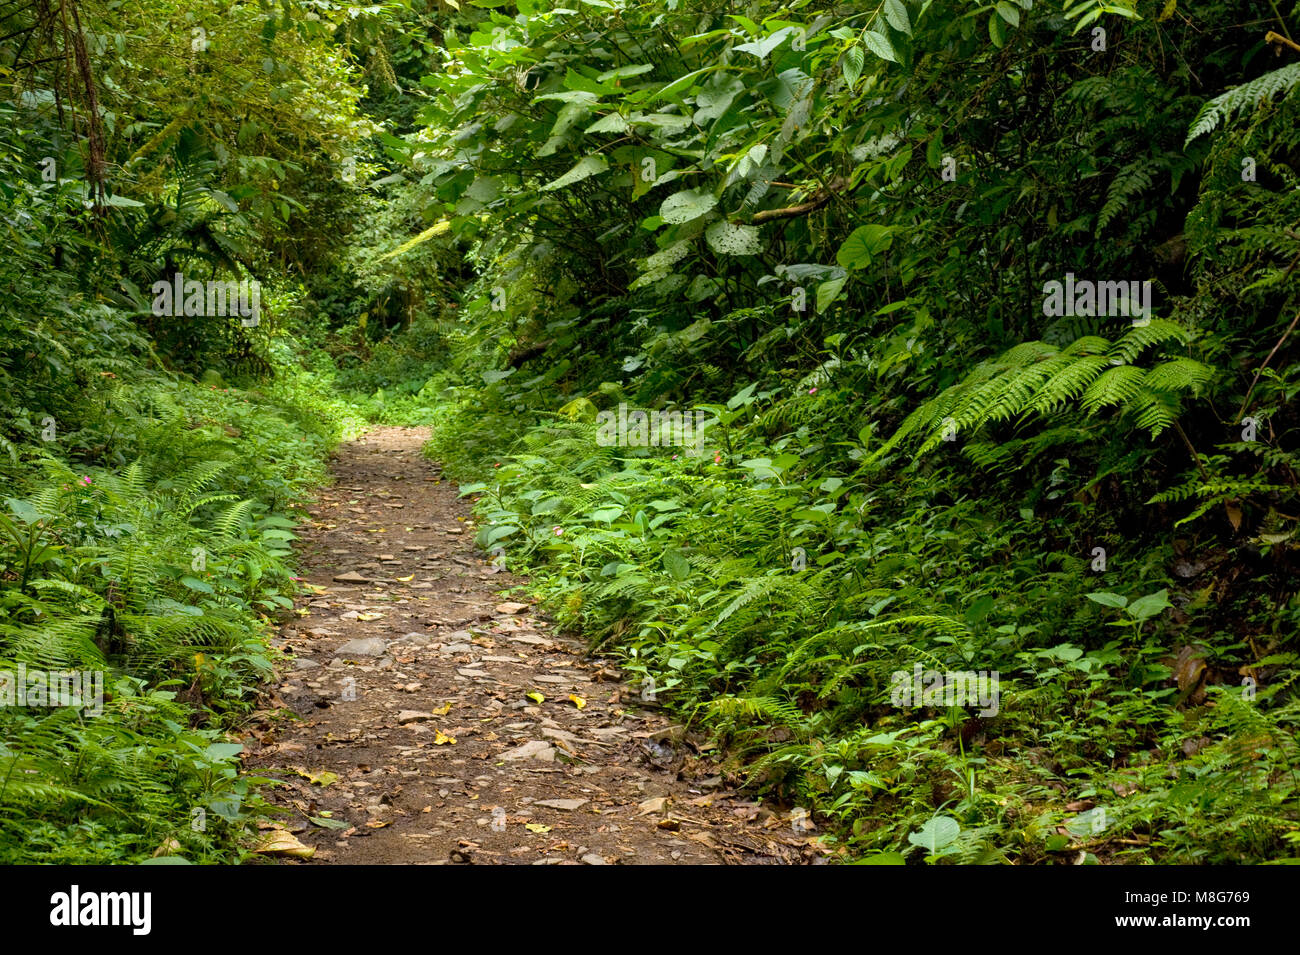 Lush, green foliage surrounds the numerous hiking trails in Monteverde Cloud Forest in Costa Rica. Stock Photo